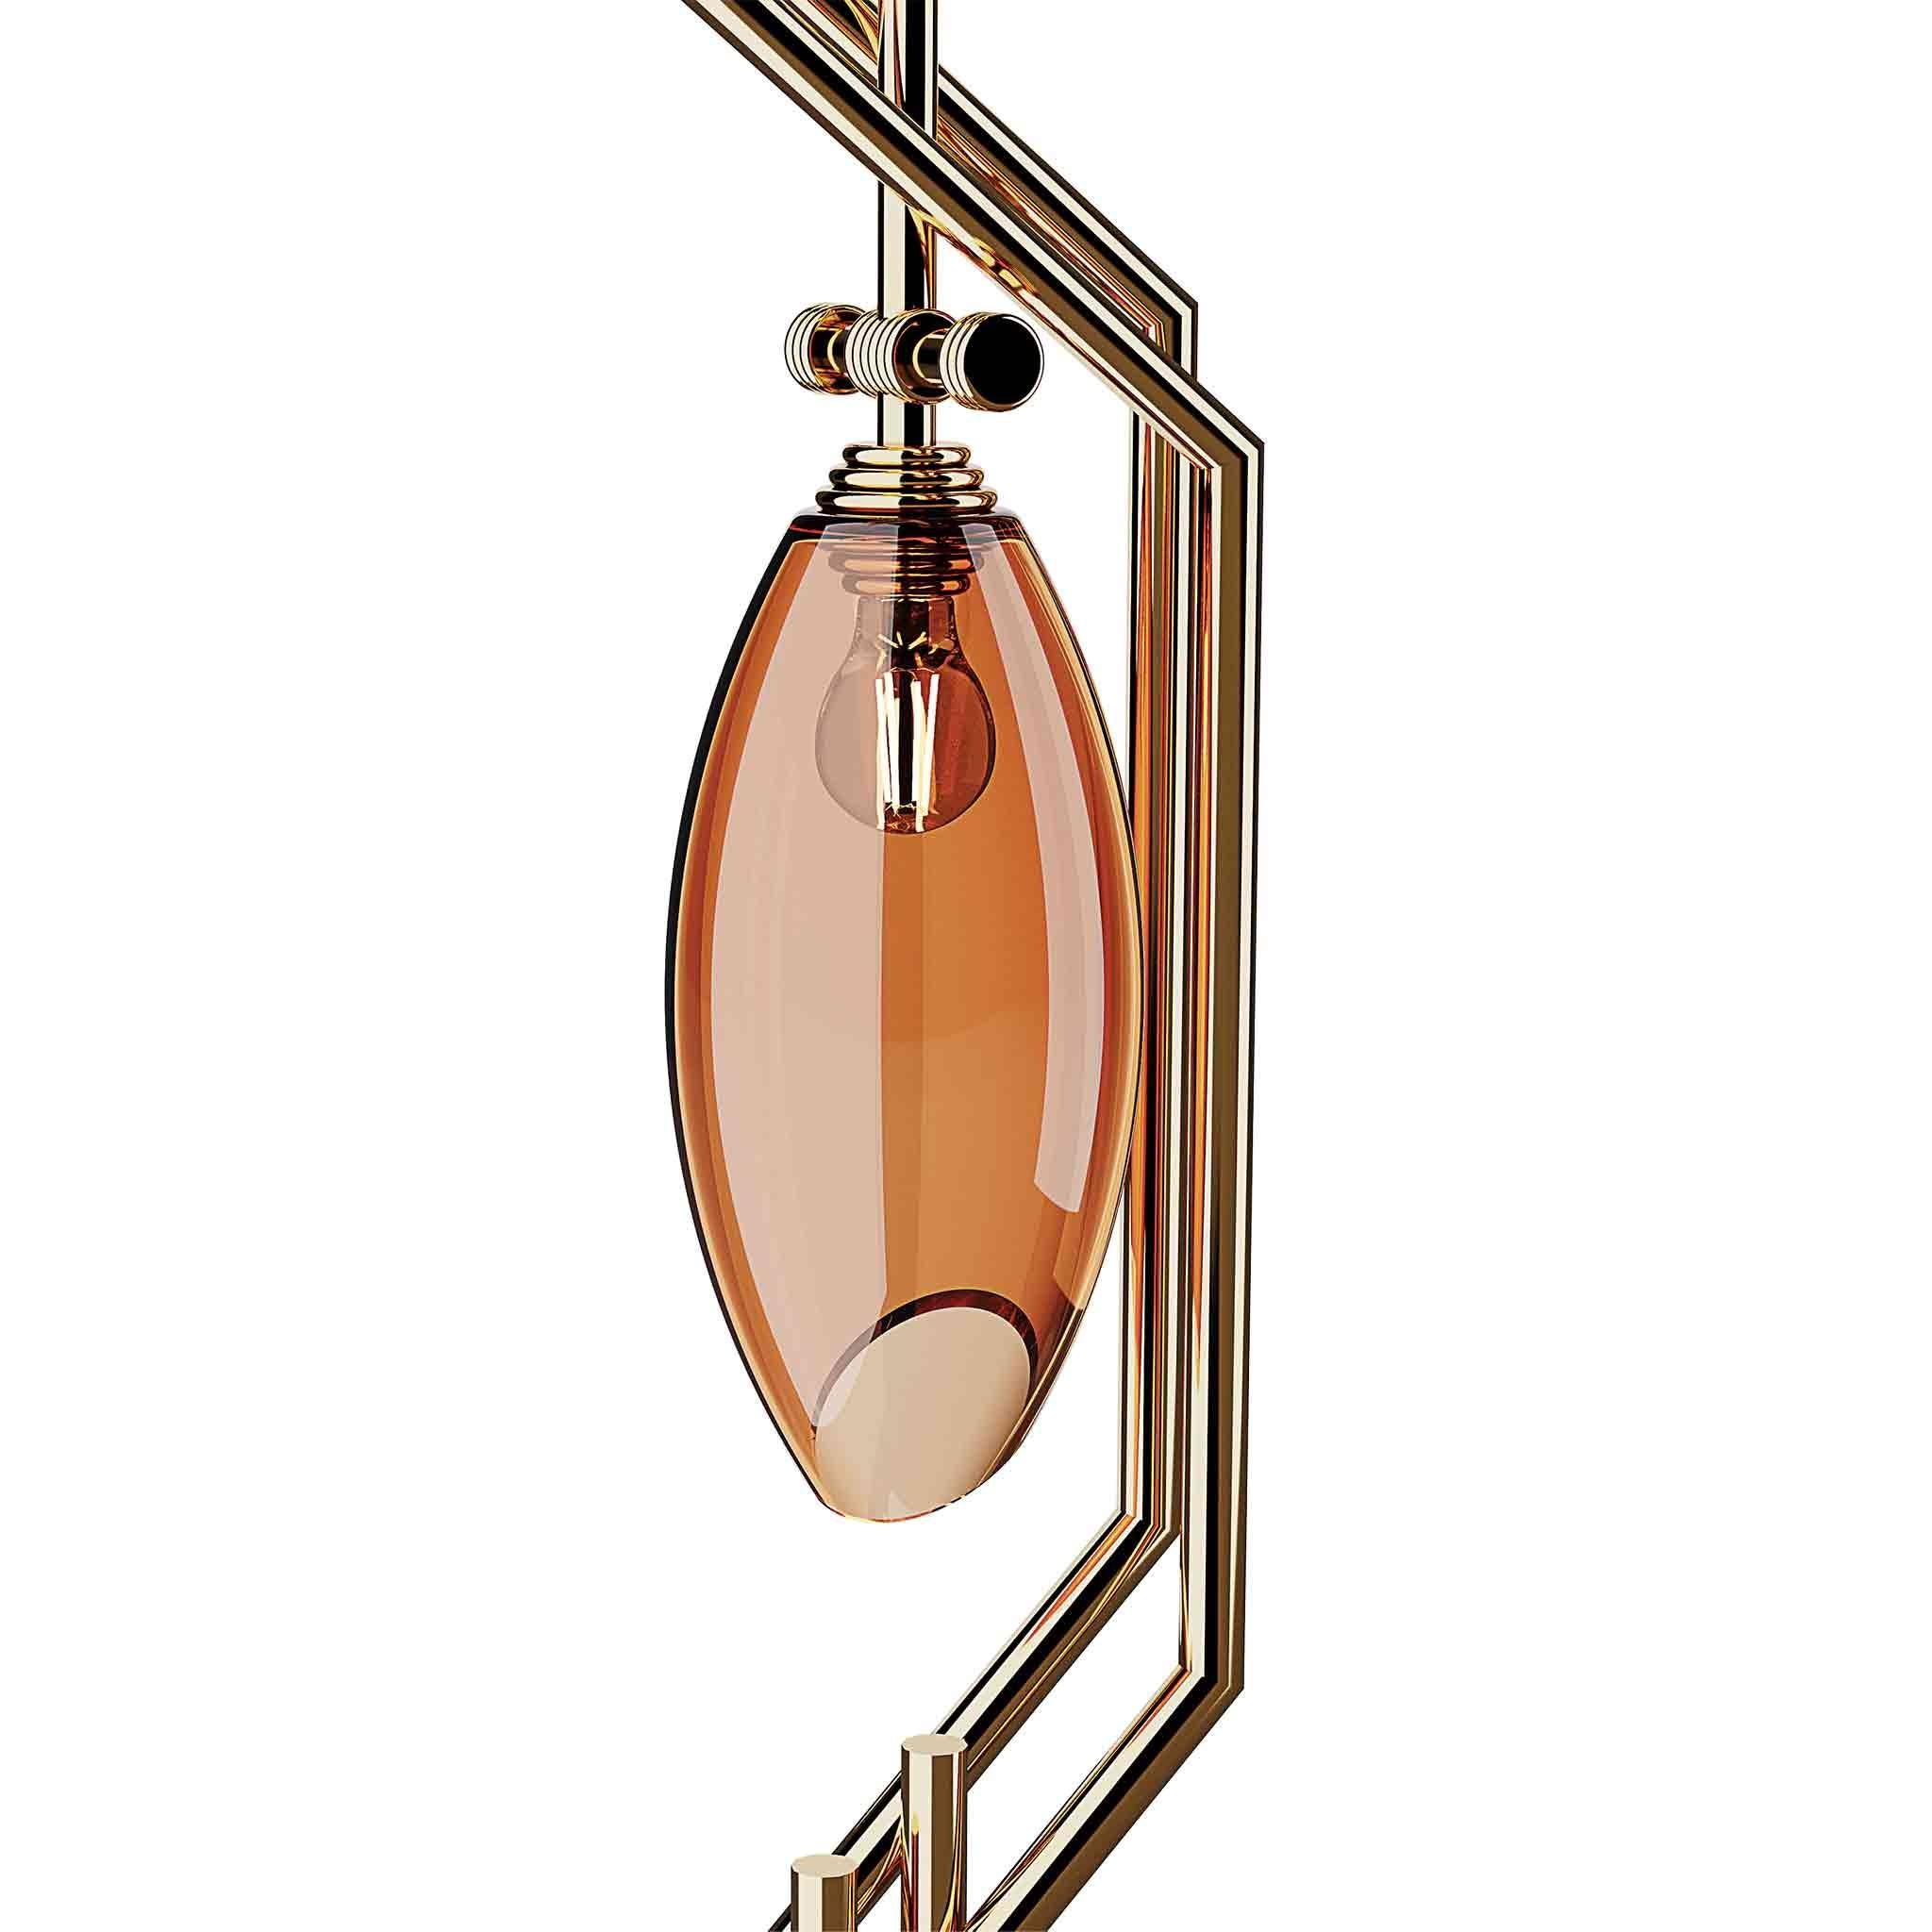 Cocoon Floor Lamp was inspired by the shapes of Art Deco jewels. A modern floor lamp designed to bring elegance and character to any living area. A luxury floor lamp for a high-end interior design project.

Materials: Structure in Polished Brass;